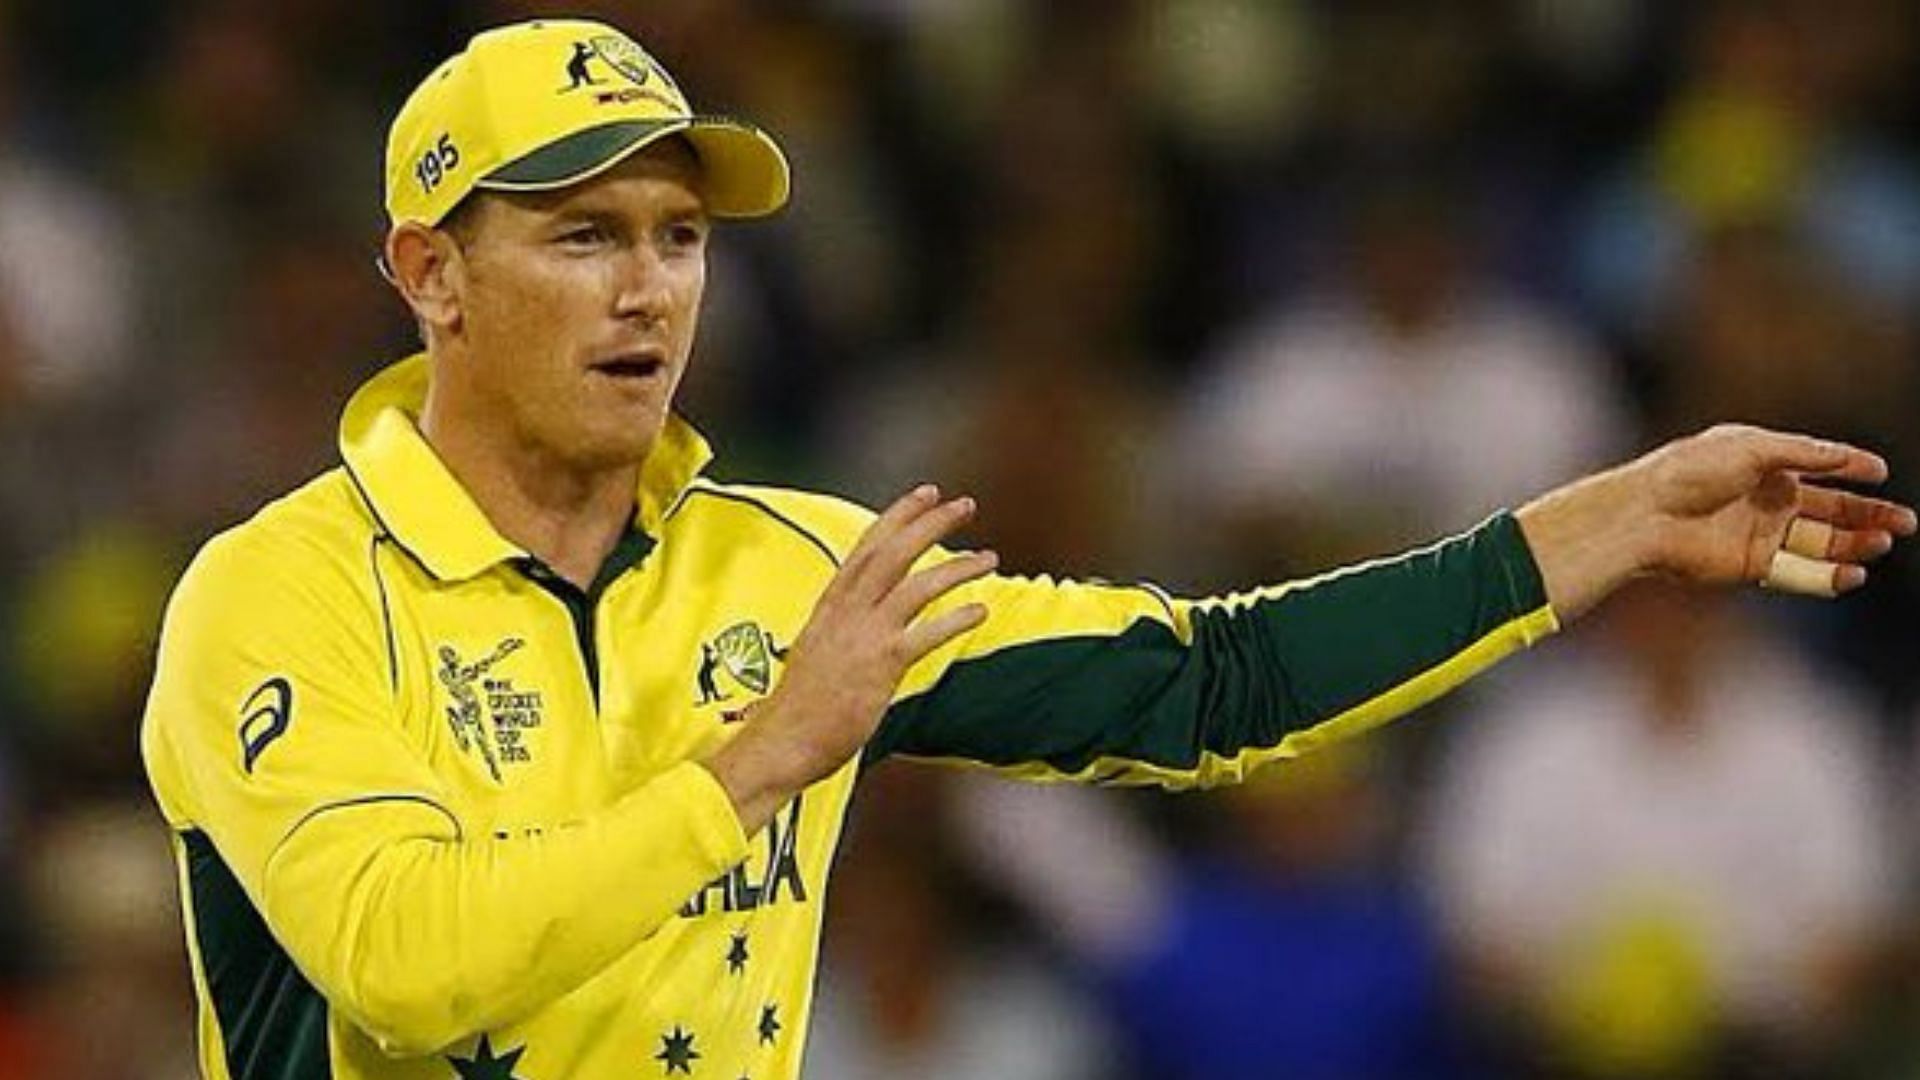 Bailey captained Australia in his debut T20I game.